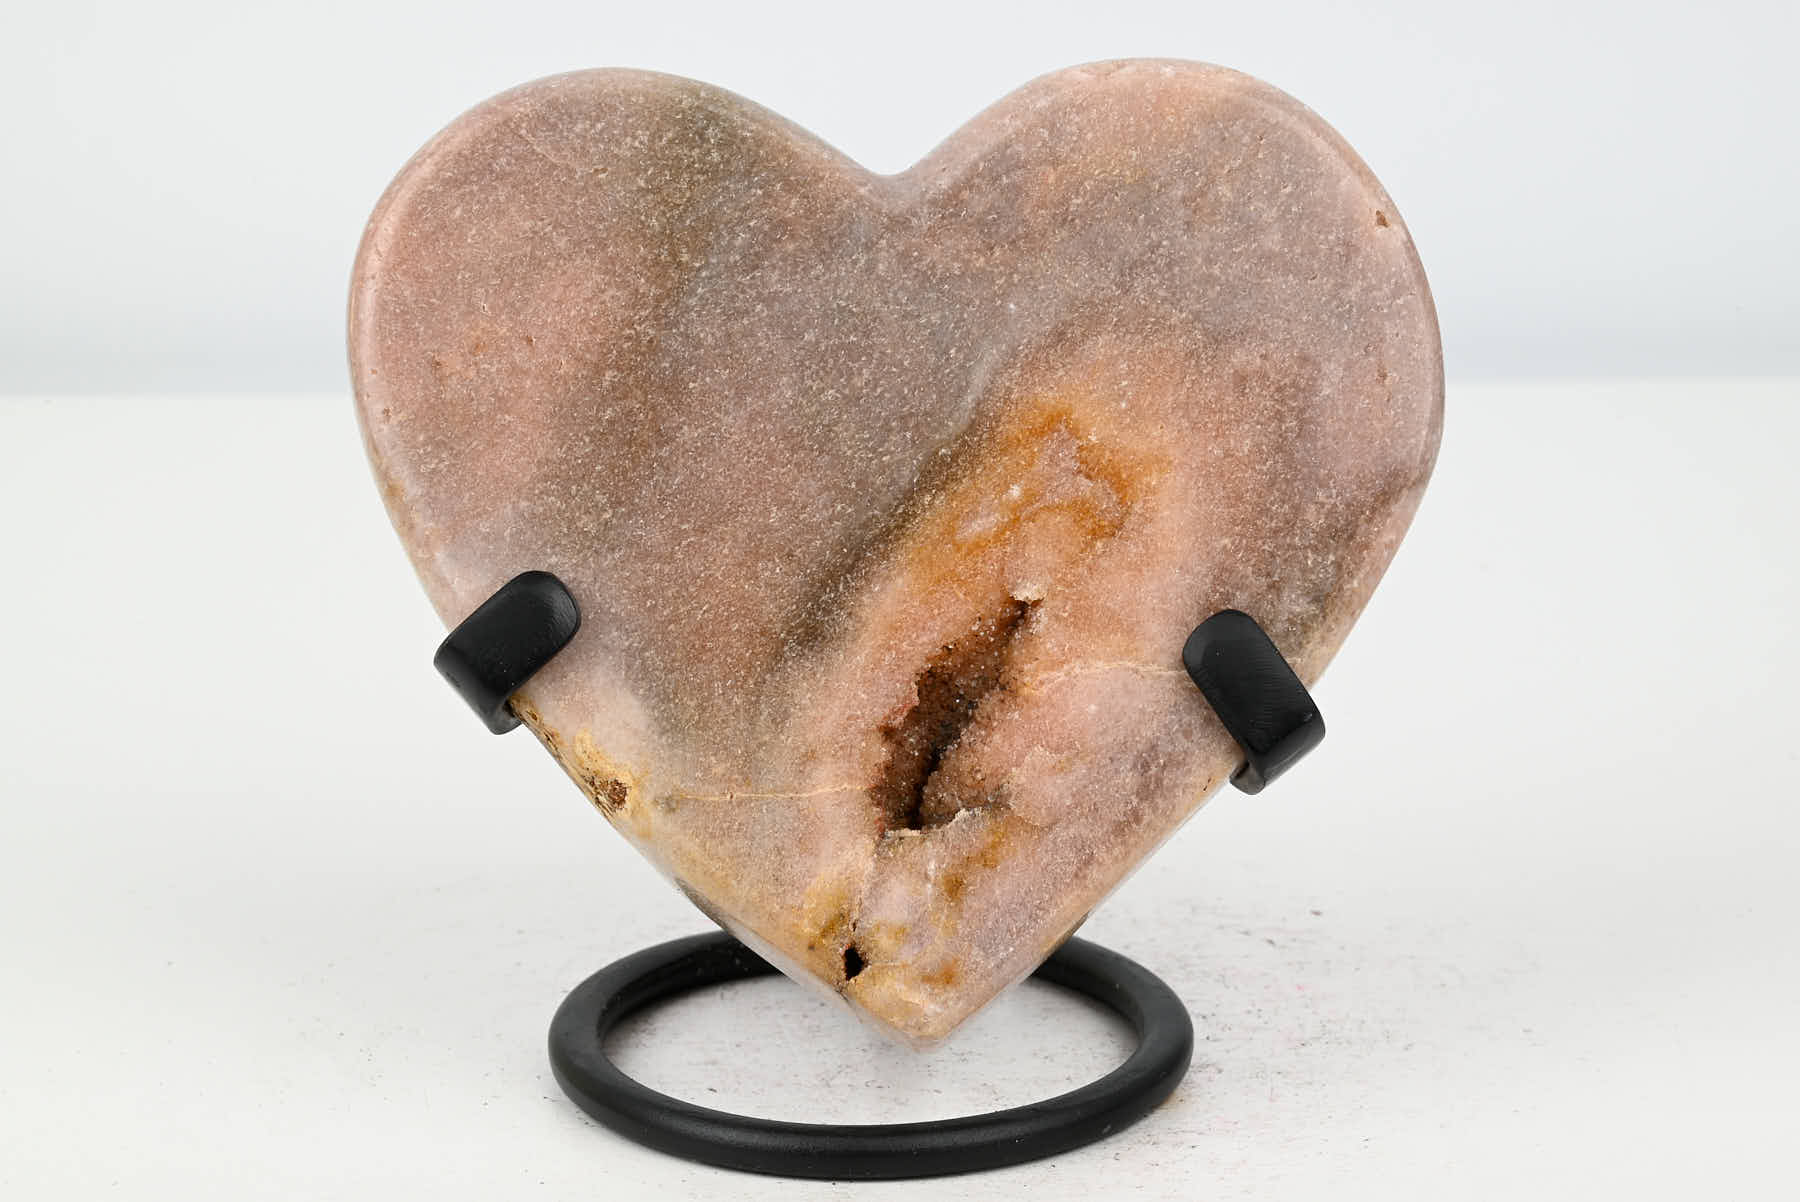 Extra Quality Pink Amethyst Heart - 0.69kg, 12cm high - #HTPINK-34005